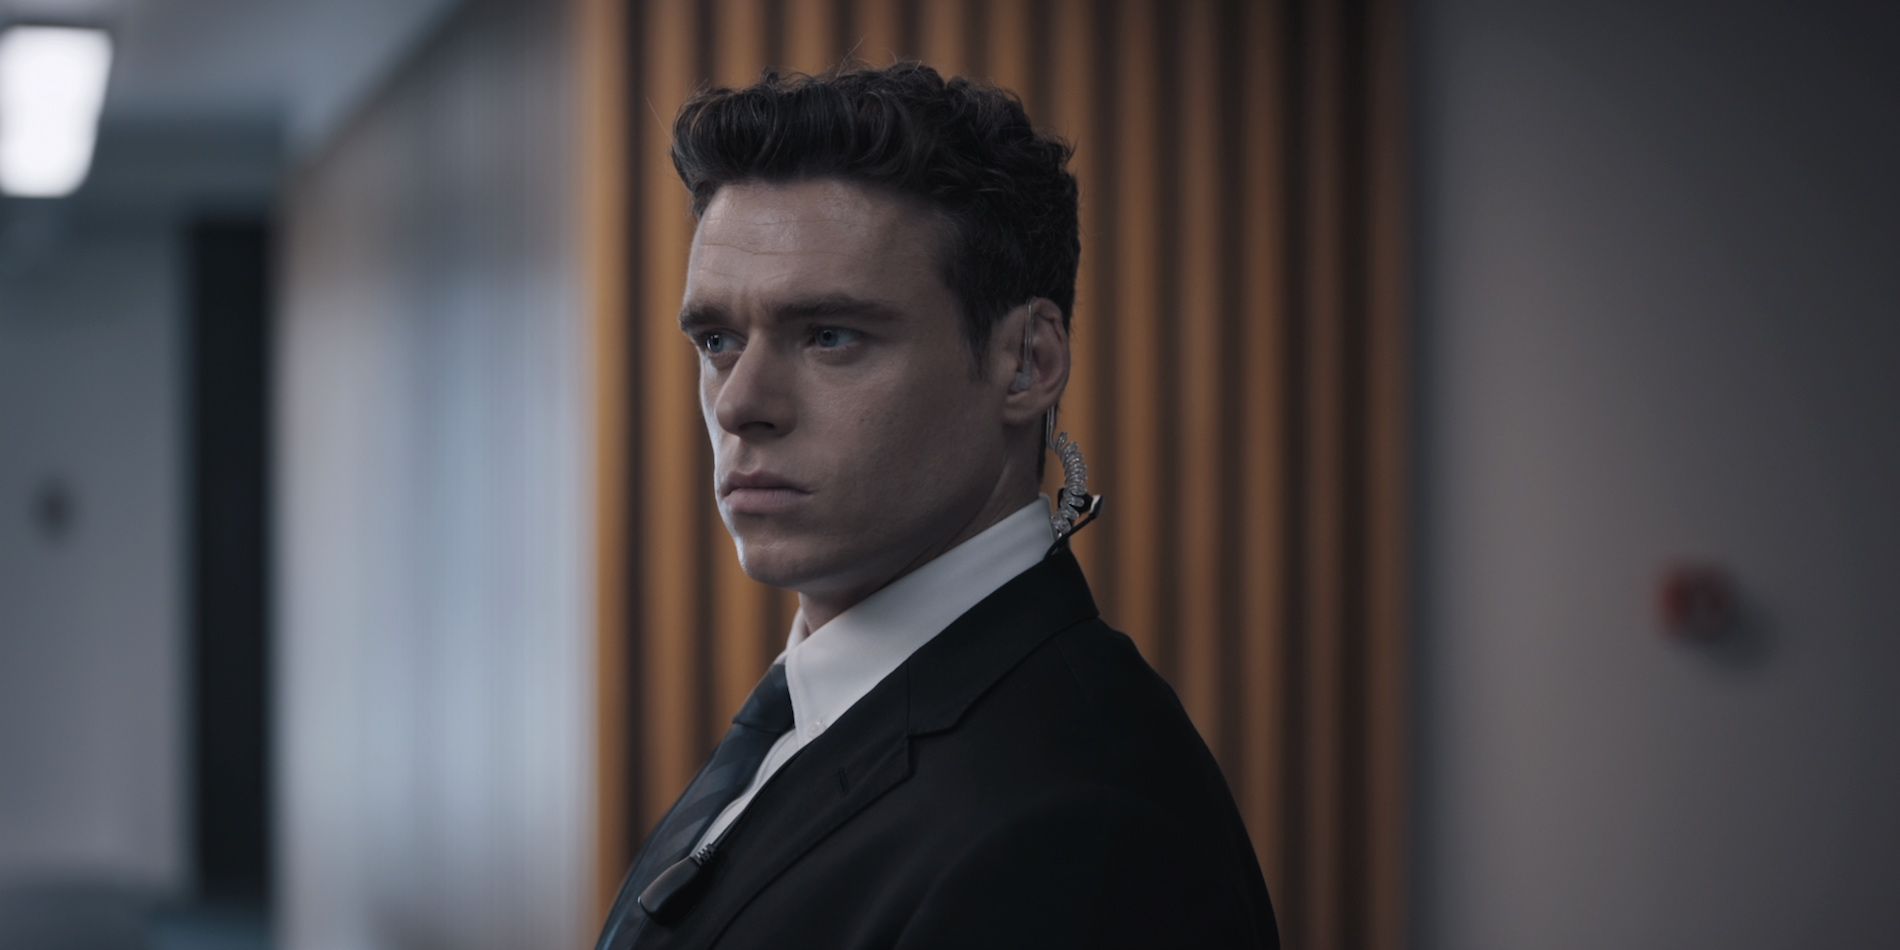 David Budd looking serious and clenching his jaw in Bodyguard